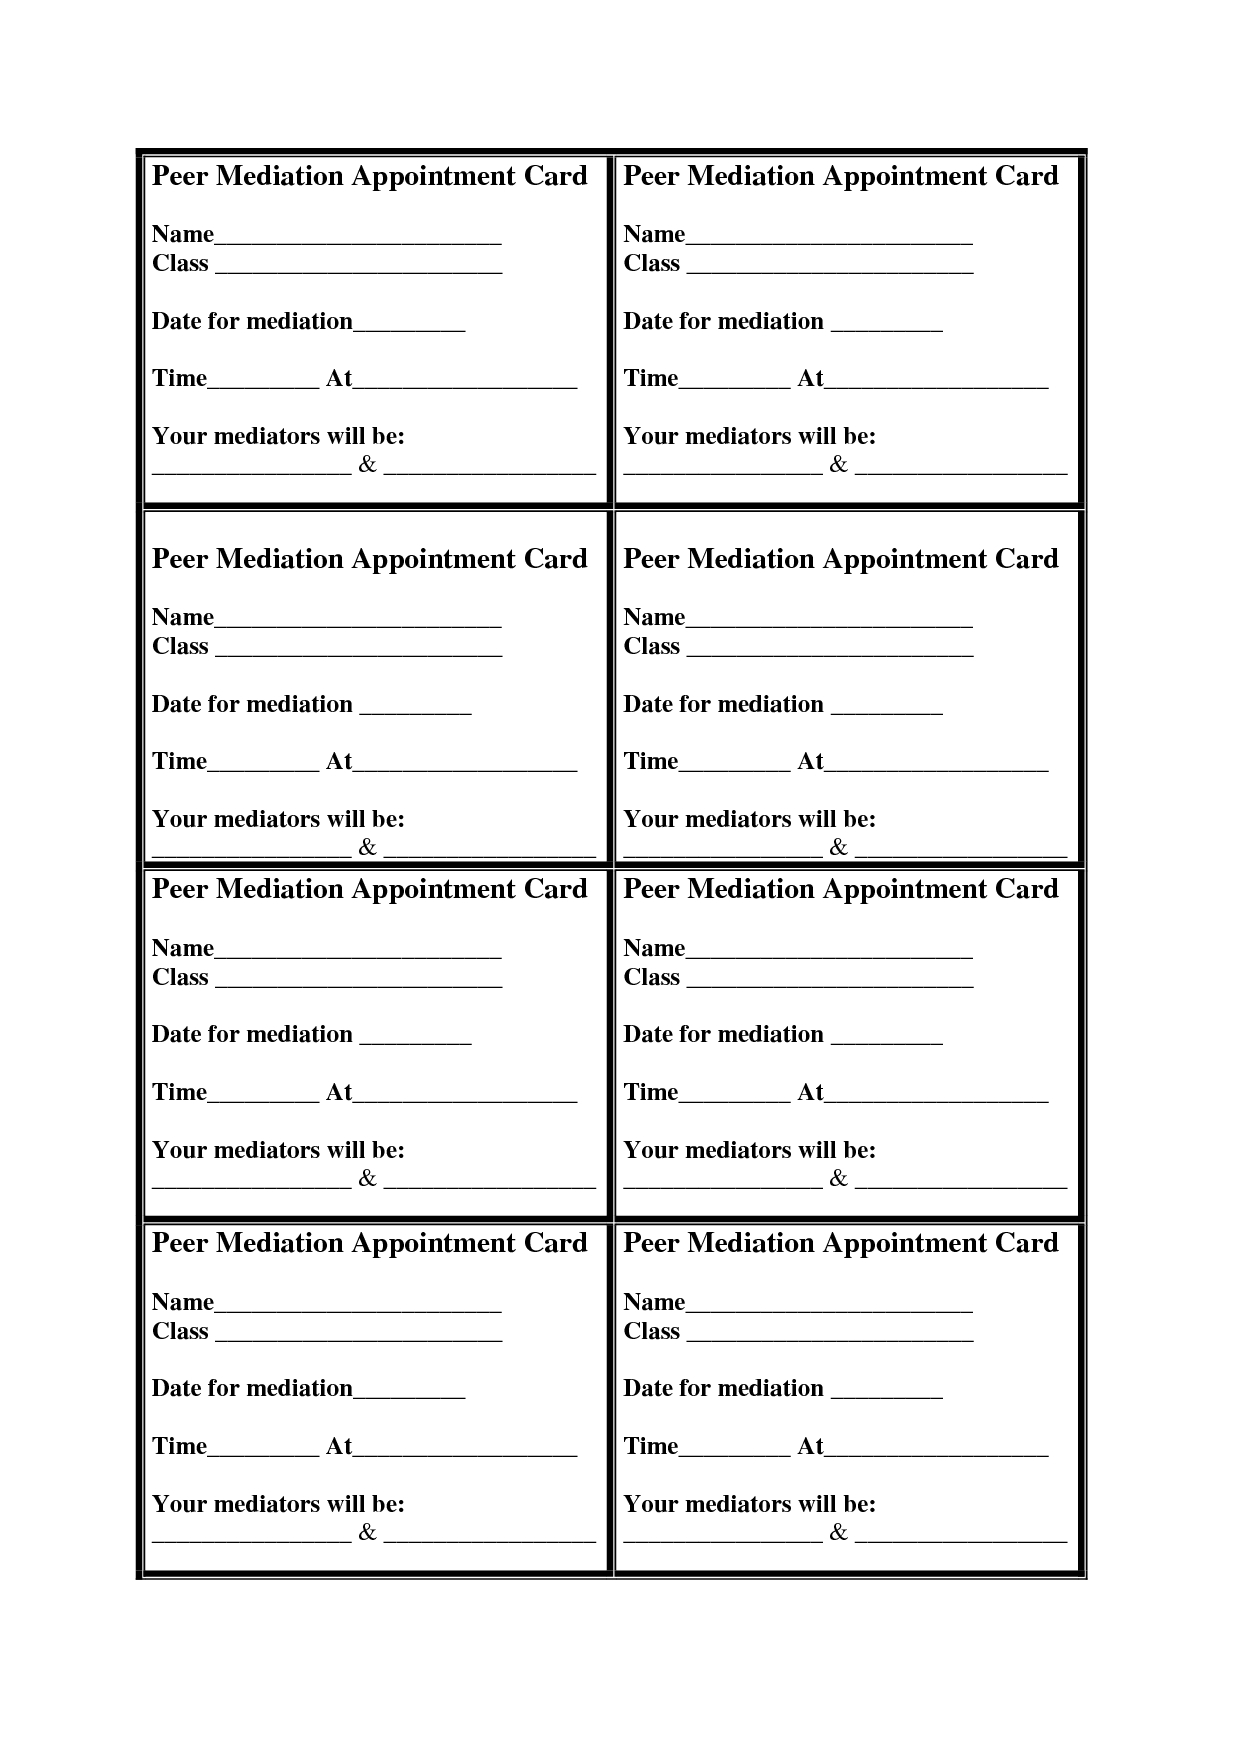 Medical Appointment Card Template Free ] - Appointment Card Pertaining To Medical Appointment Card Template Free